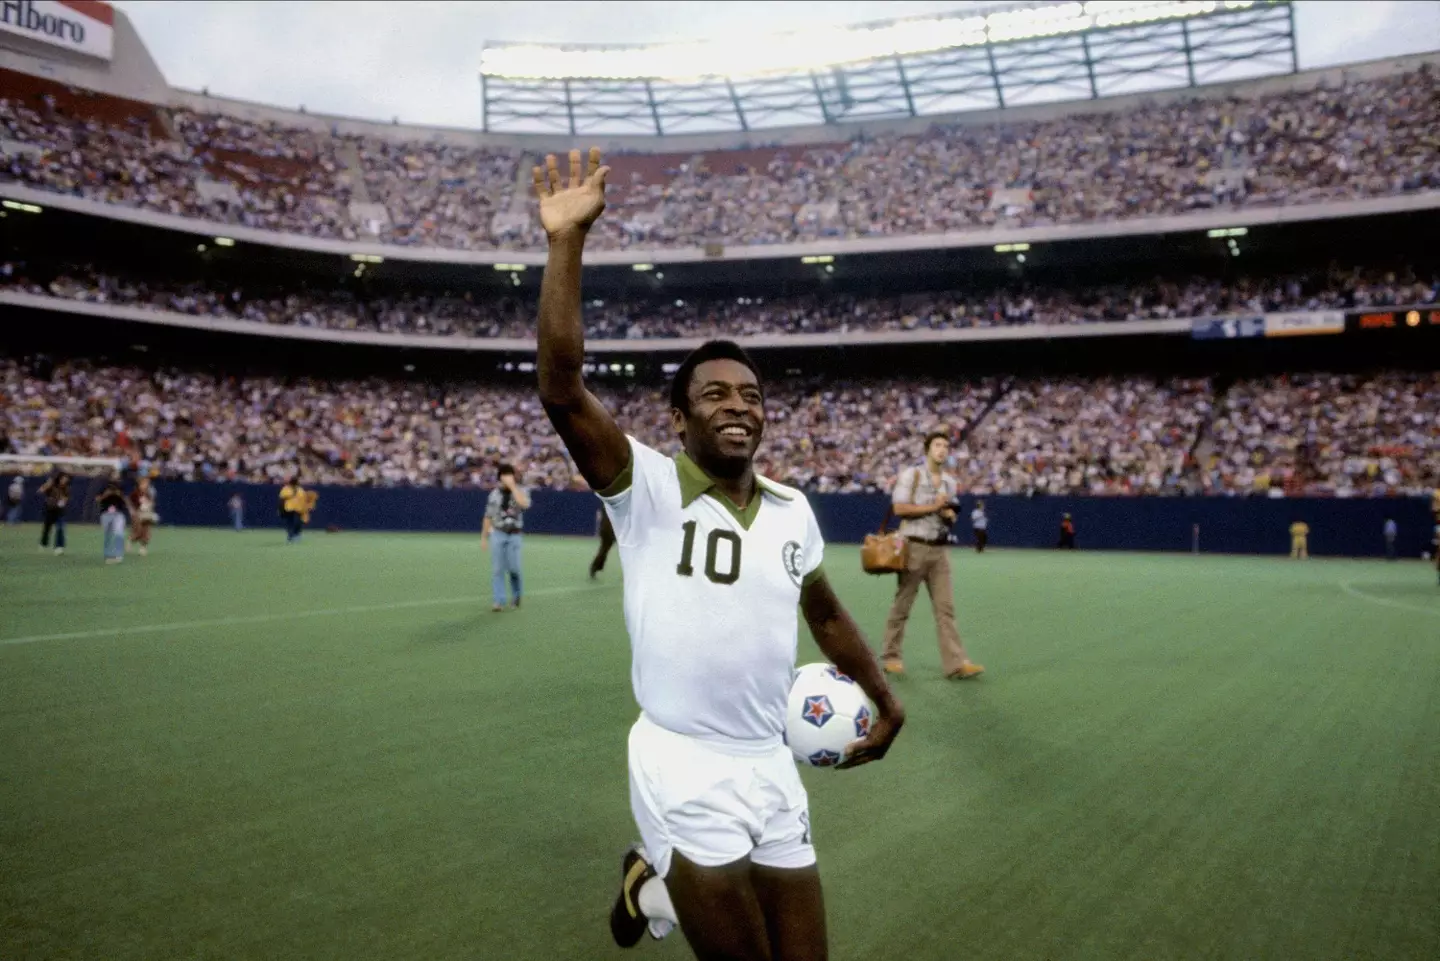 Pelé is one of the most famous footballers in the world.